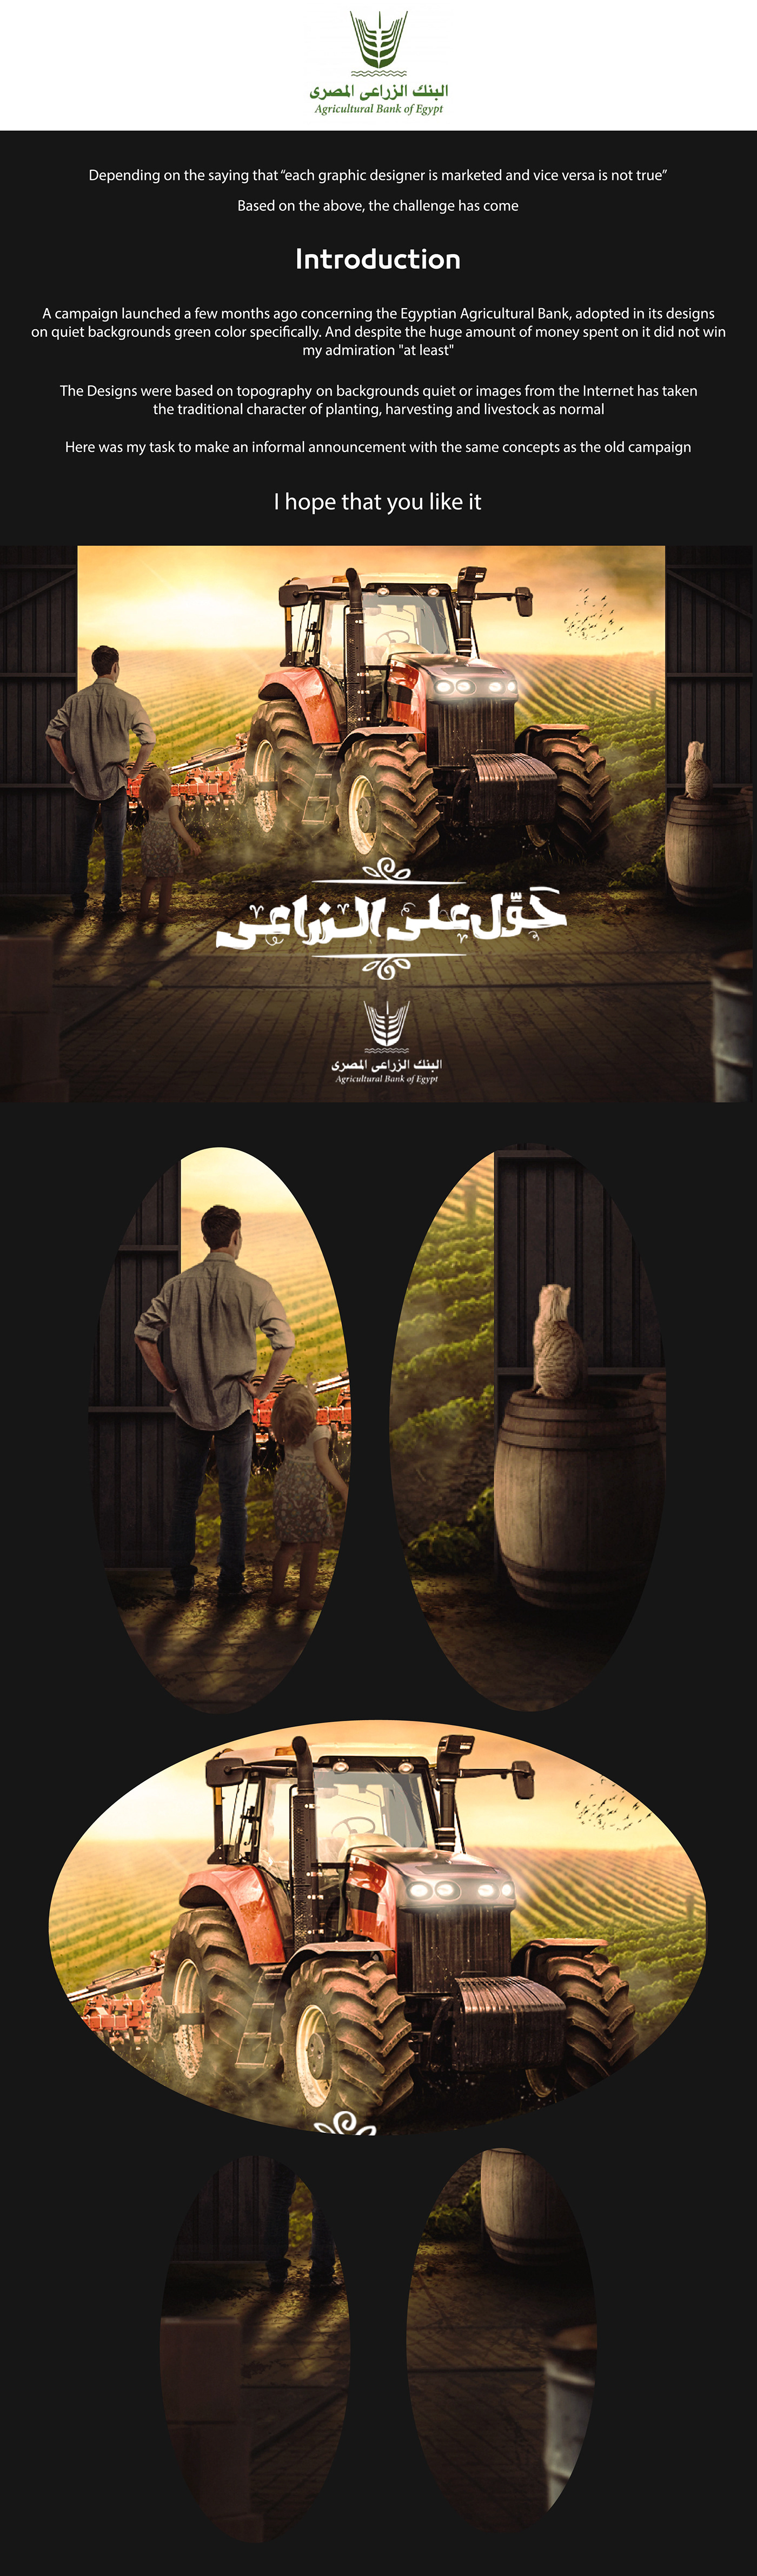 Re - campaign of the Agricultural Bank of Egypt on Behance